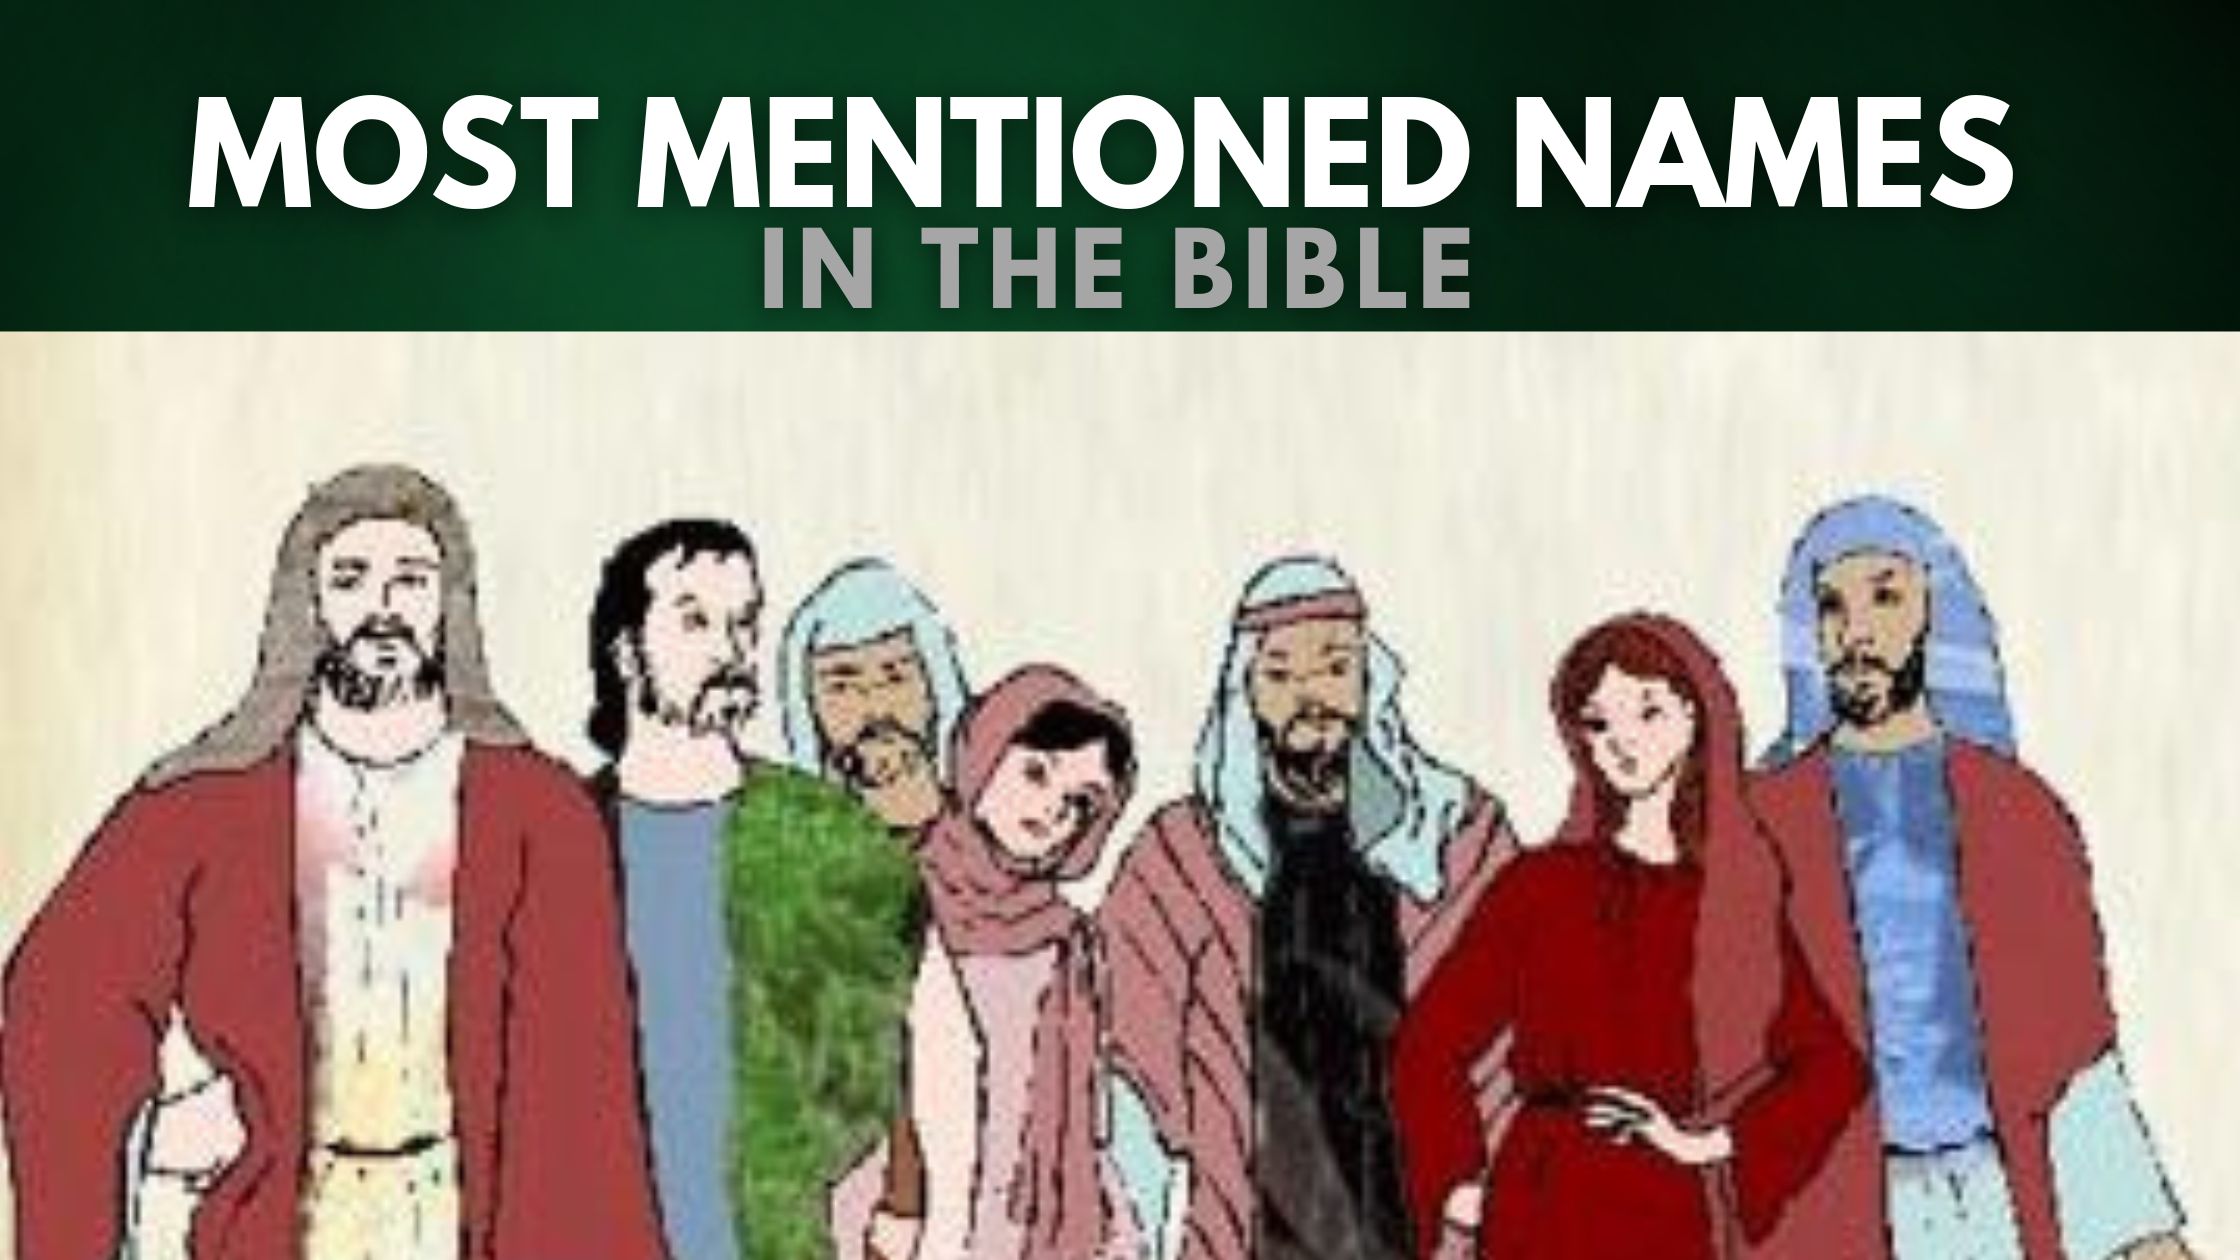 Most Mentioned Names in the Bible